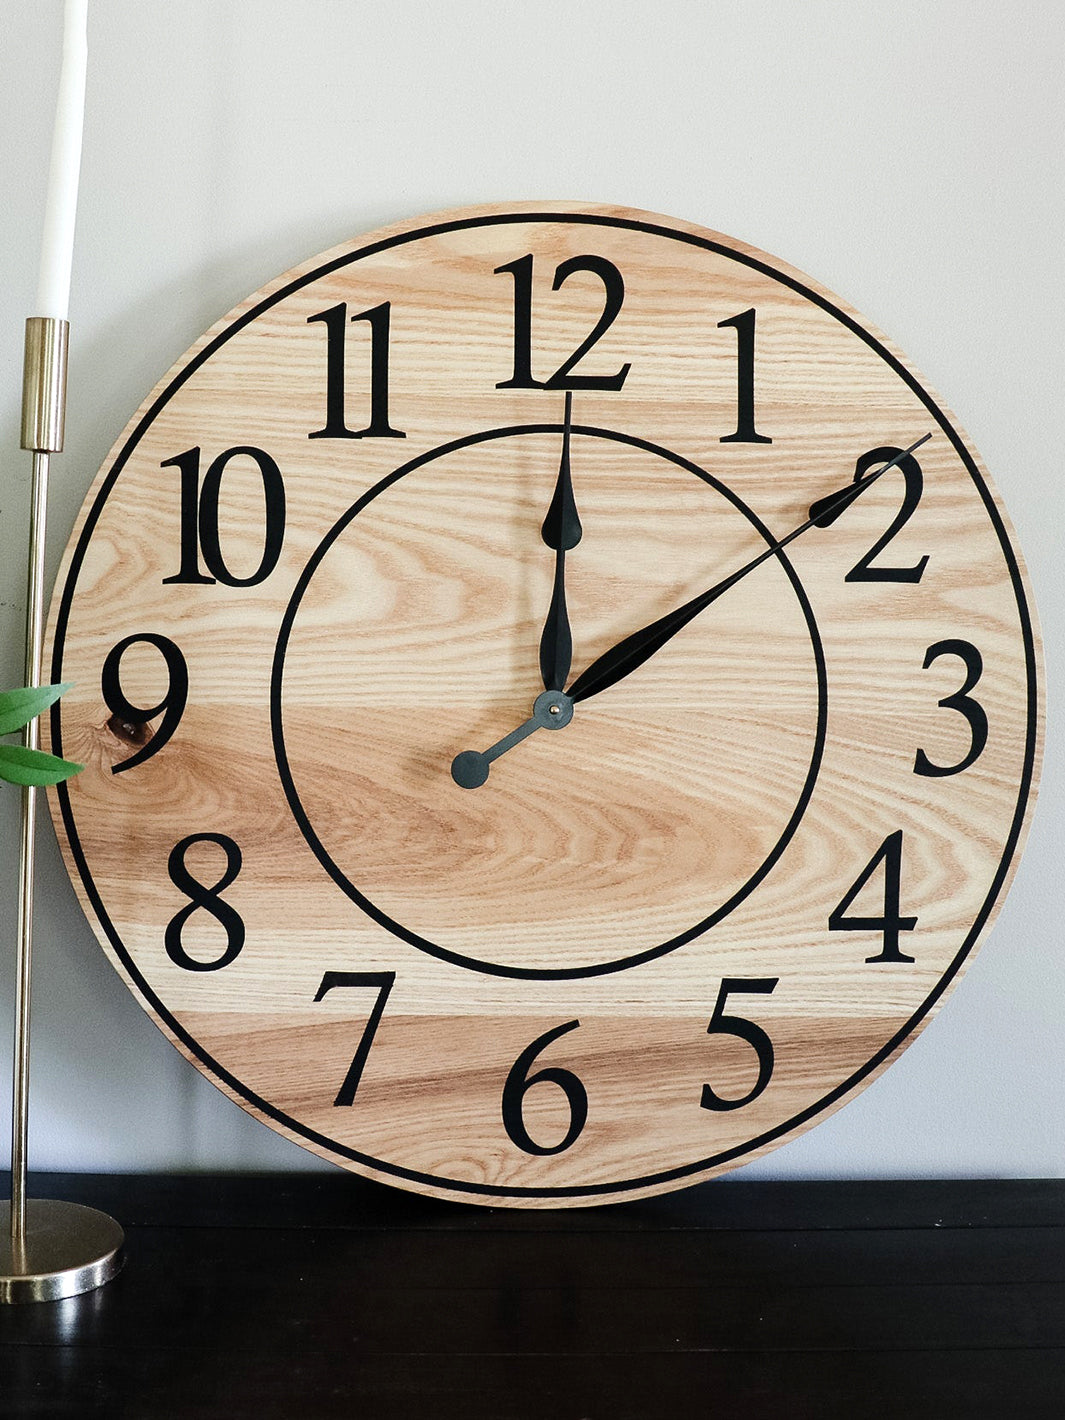 Solid Ash Wood Wall Clock with Black Numbers and Lines Earthly Comfort Clocks 1024-3